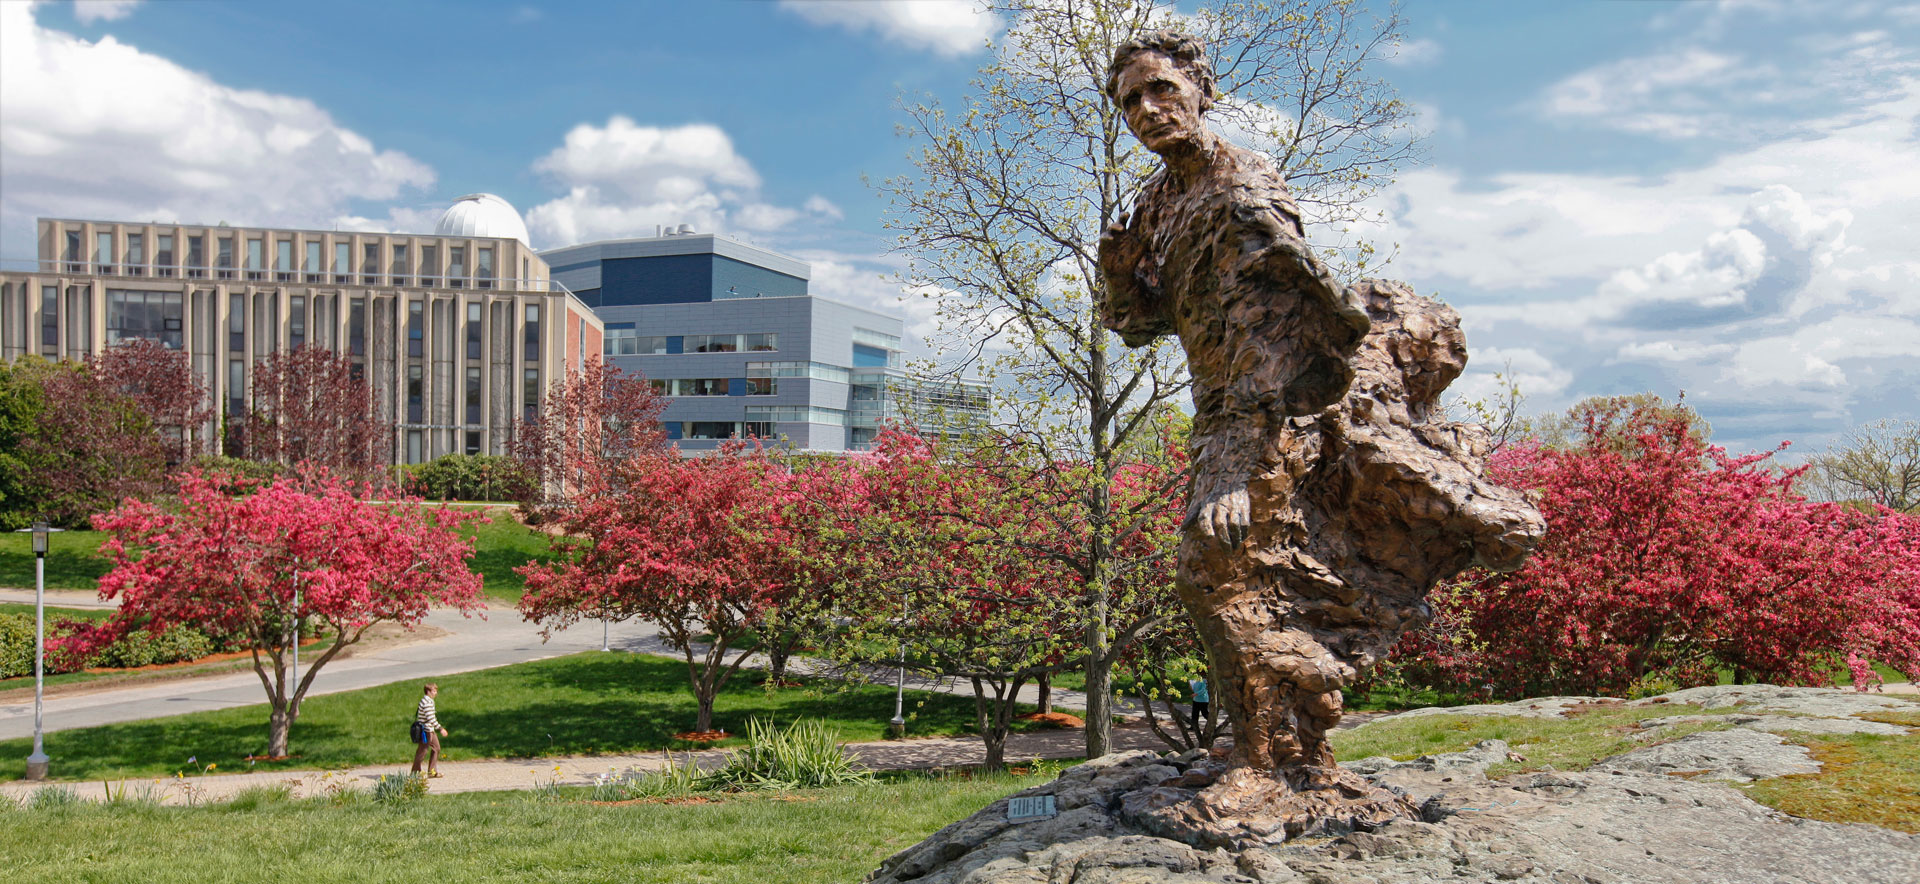 Louis D. Brandeis statue in the spring